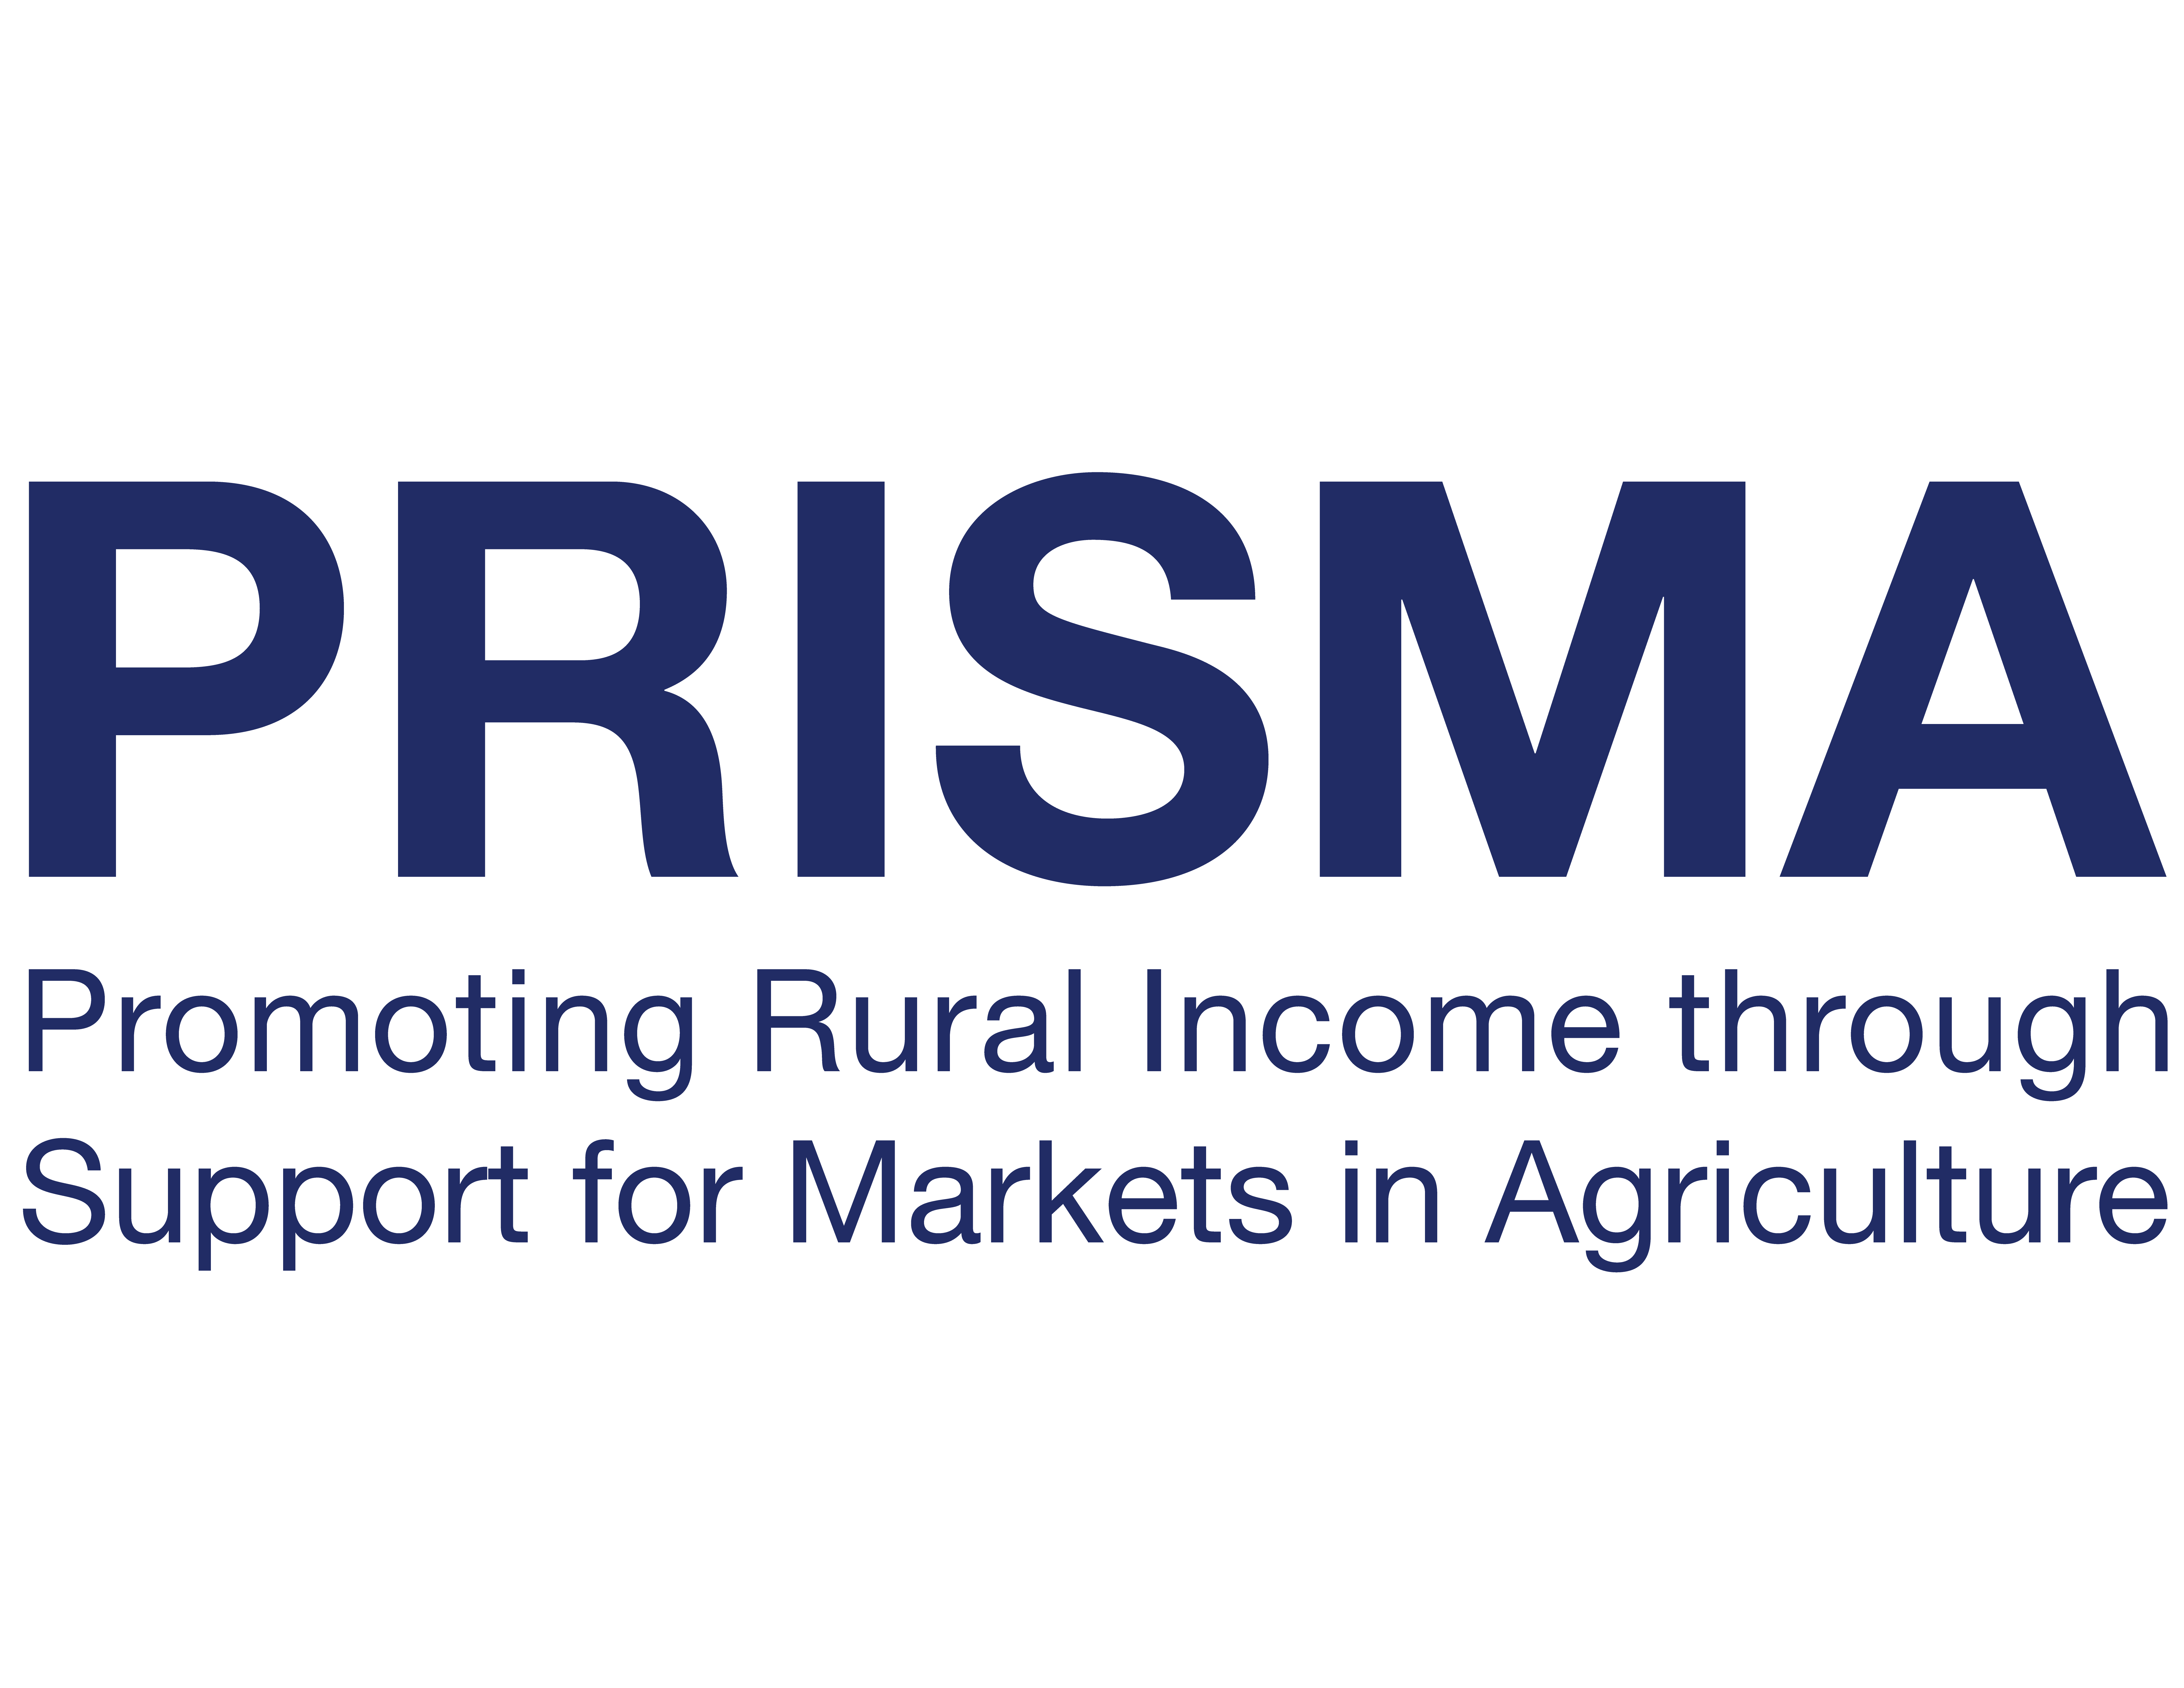 AIP – Promoting Rural Income Through Support for Markets in Agriculture (PRISMA)